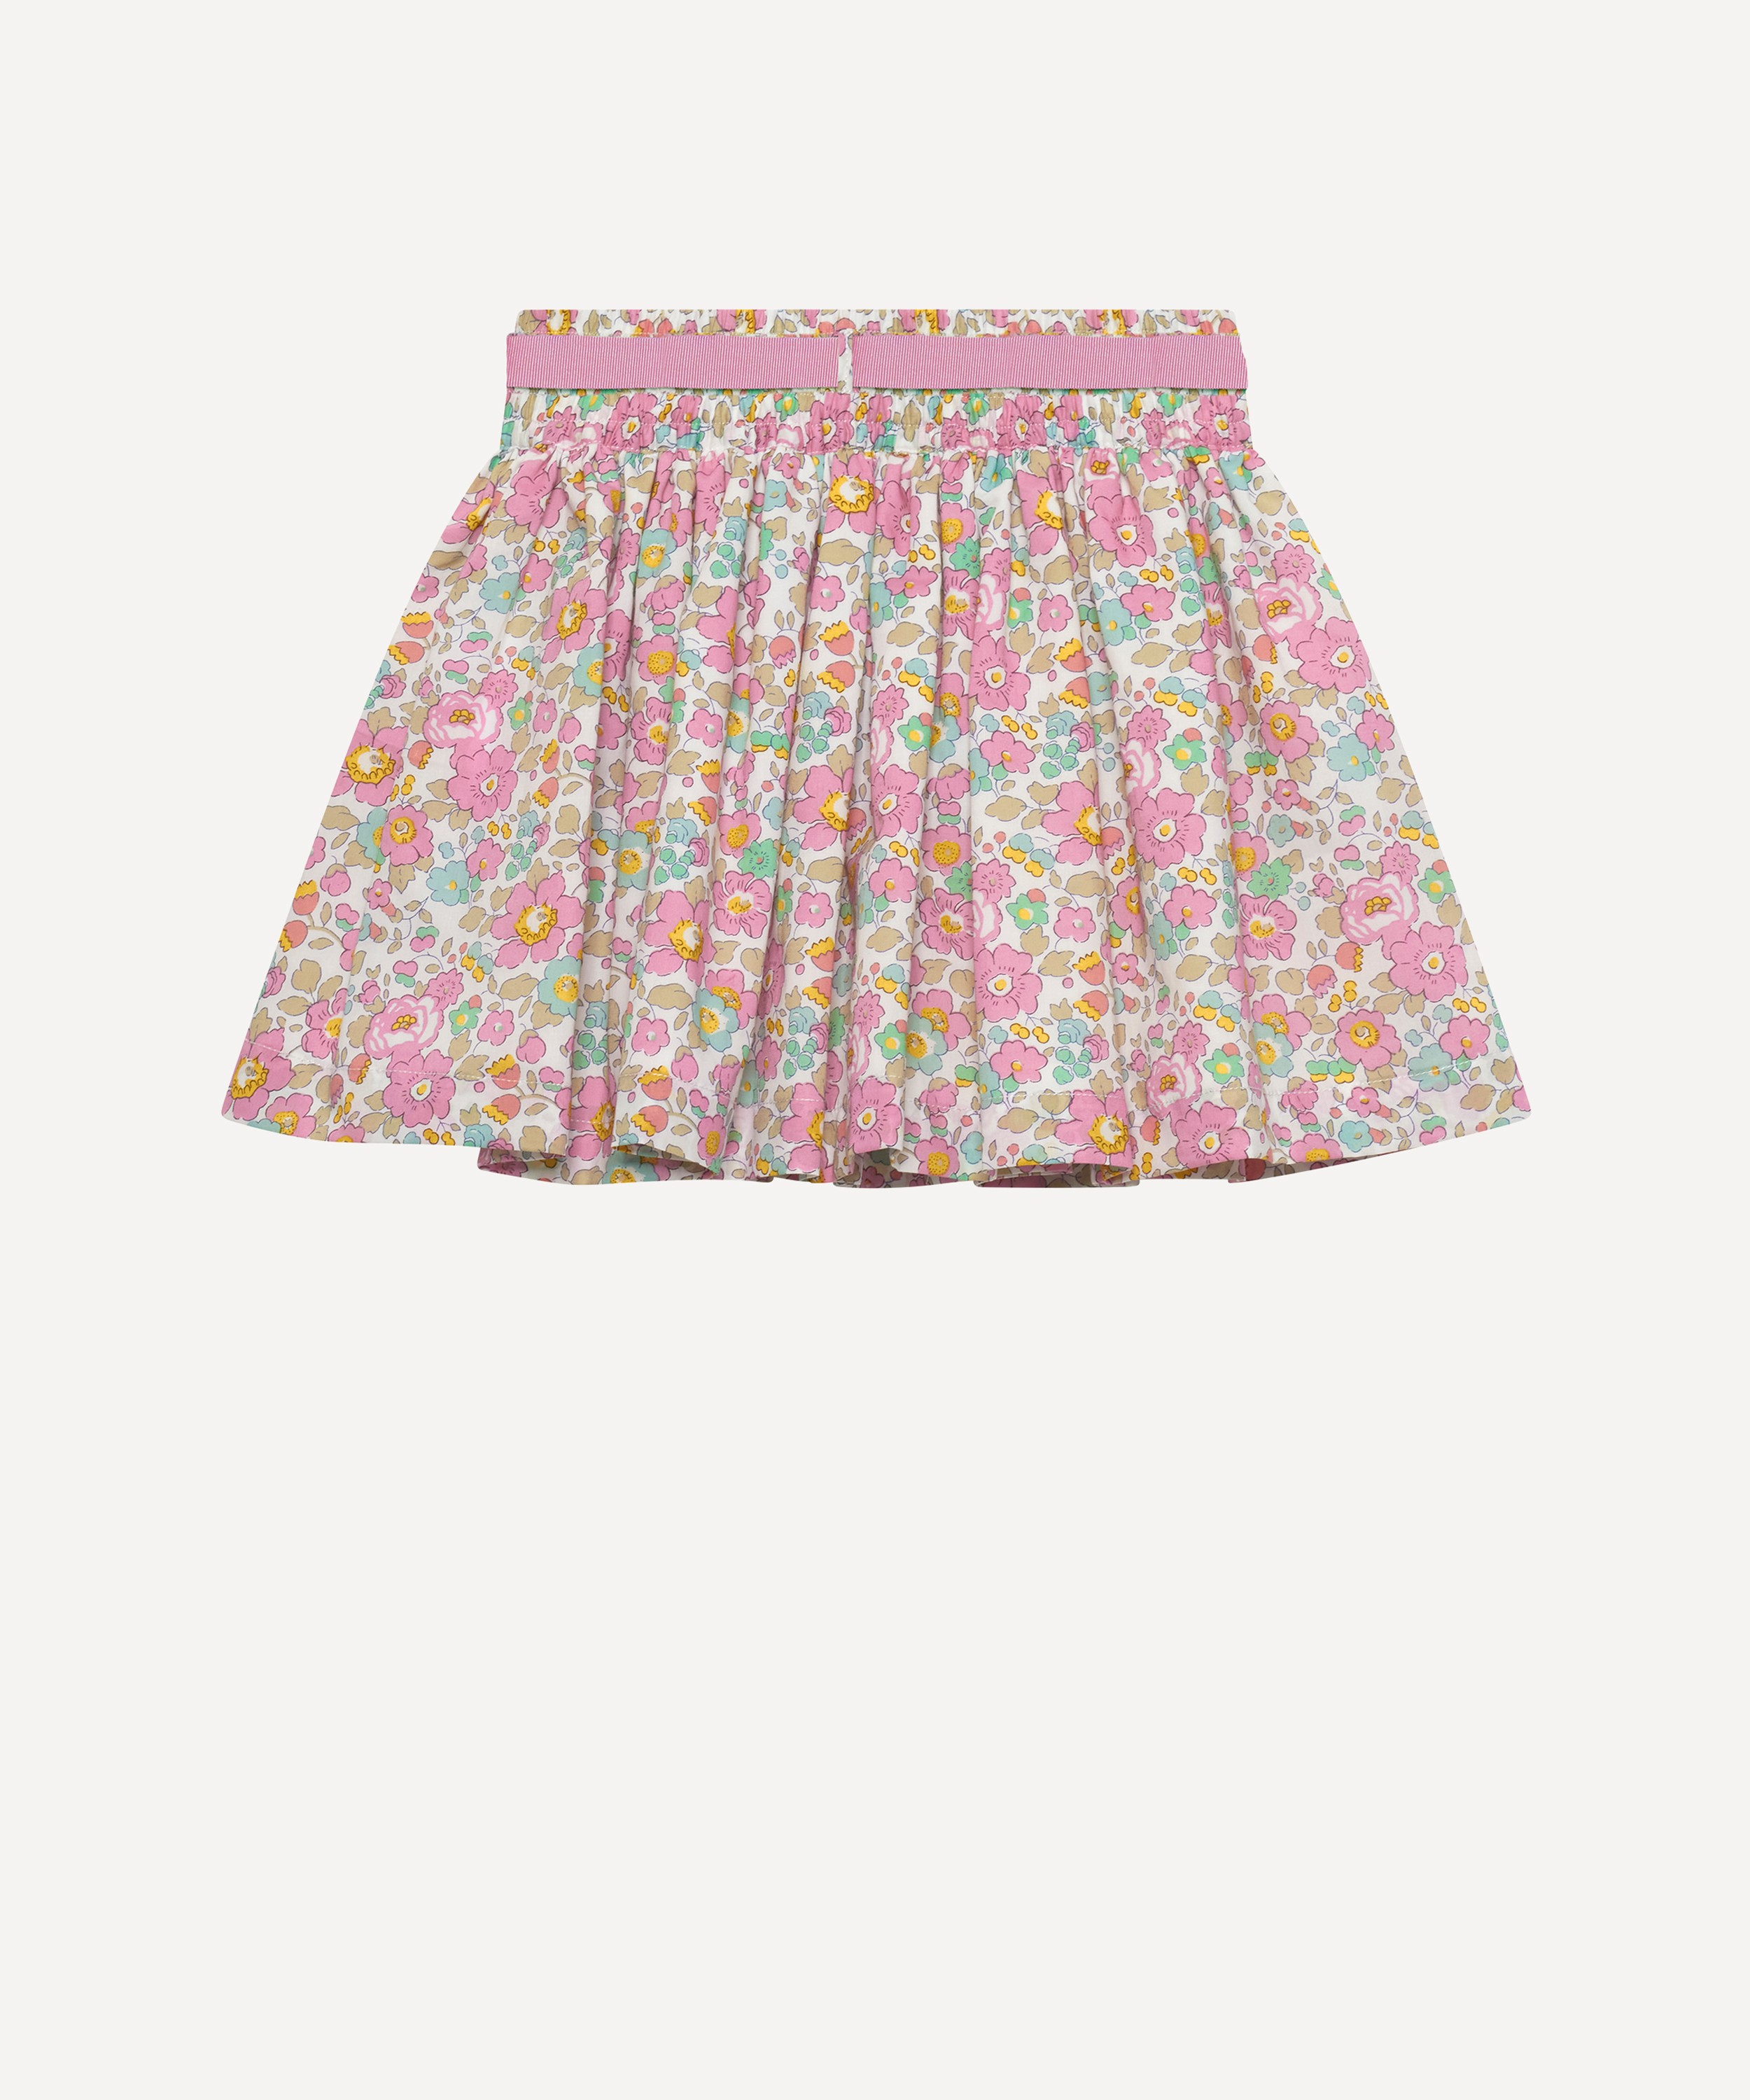 Trotters - Betsy Bow Skirt 8-11 Years image number 1